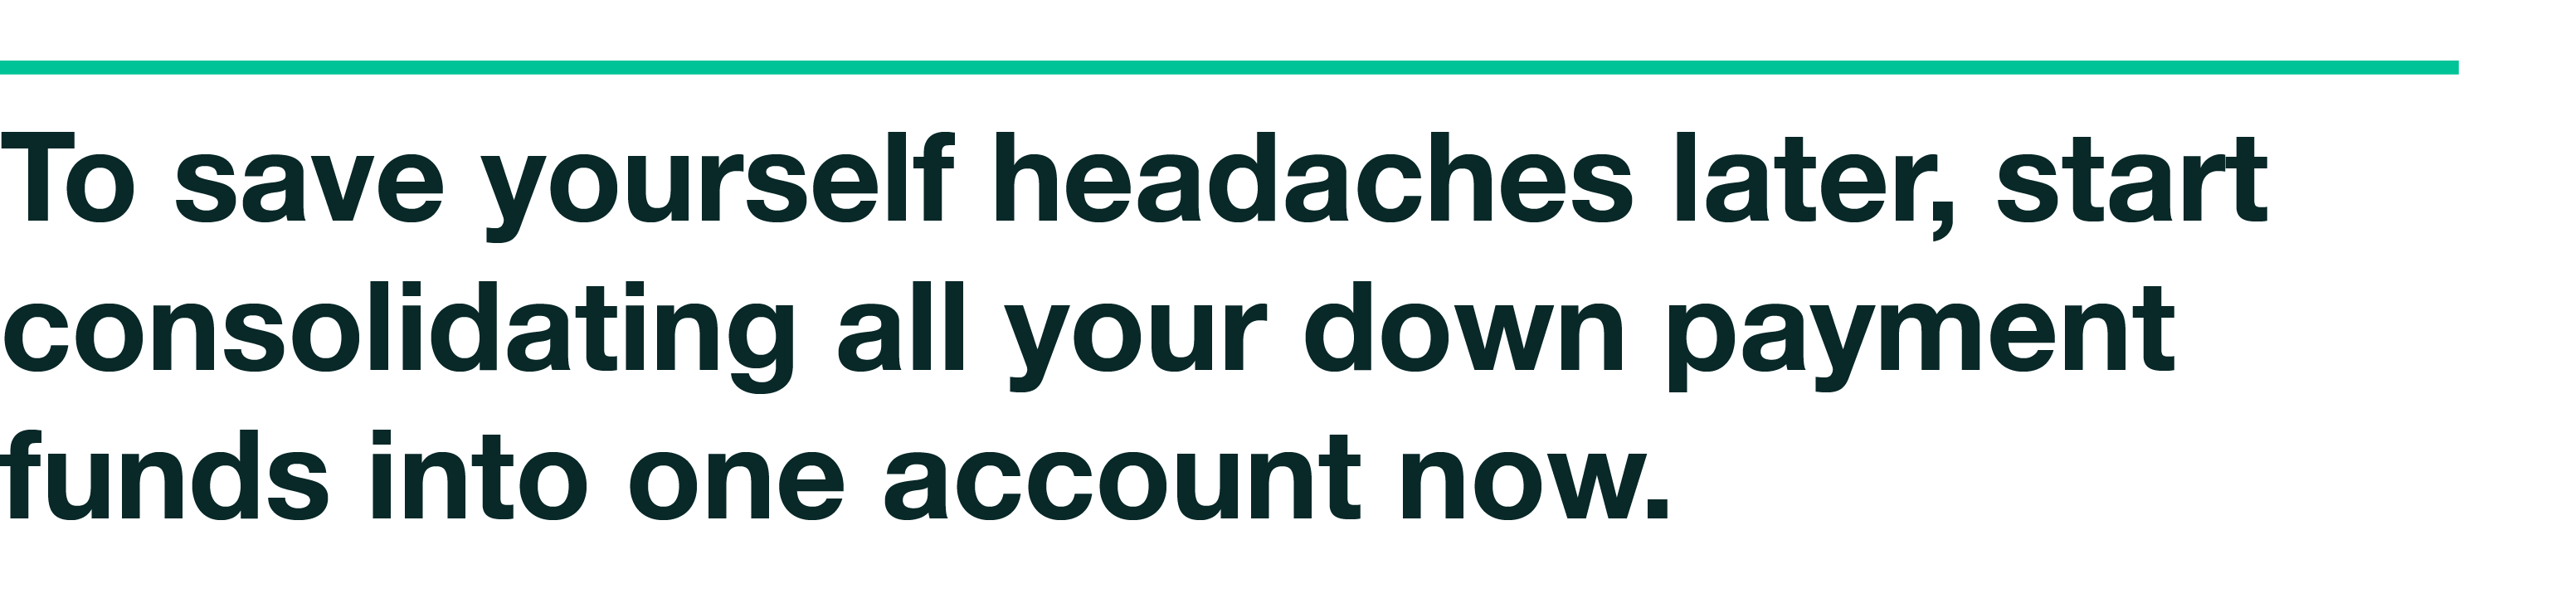  Quote: To Save Yourself Headaches Later, Start Consolidating All Your Down Payment Funds Into One Account Now